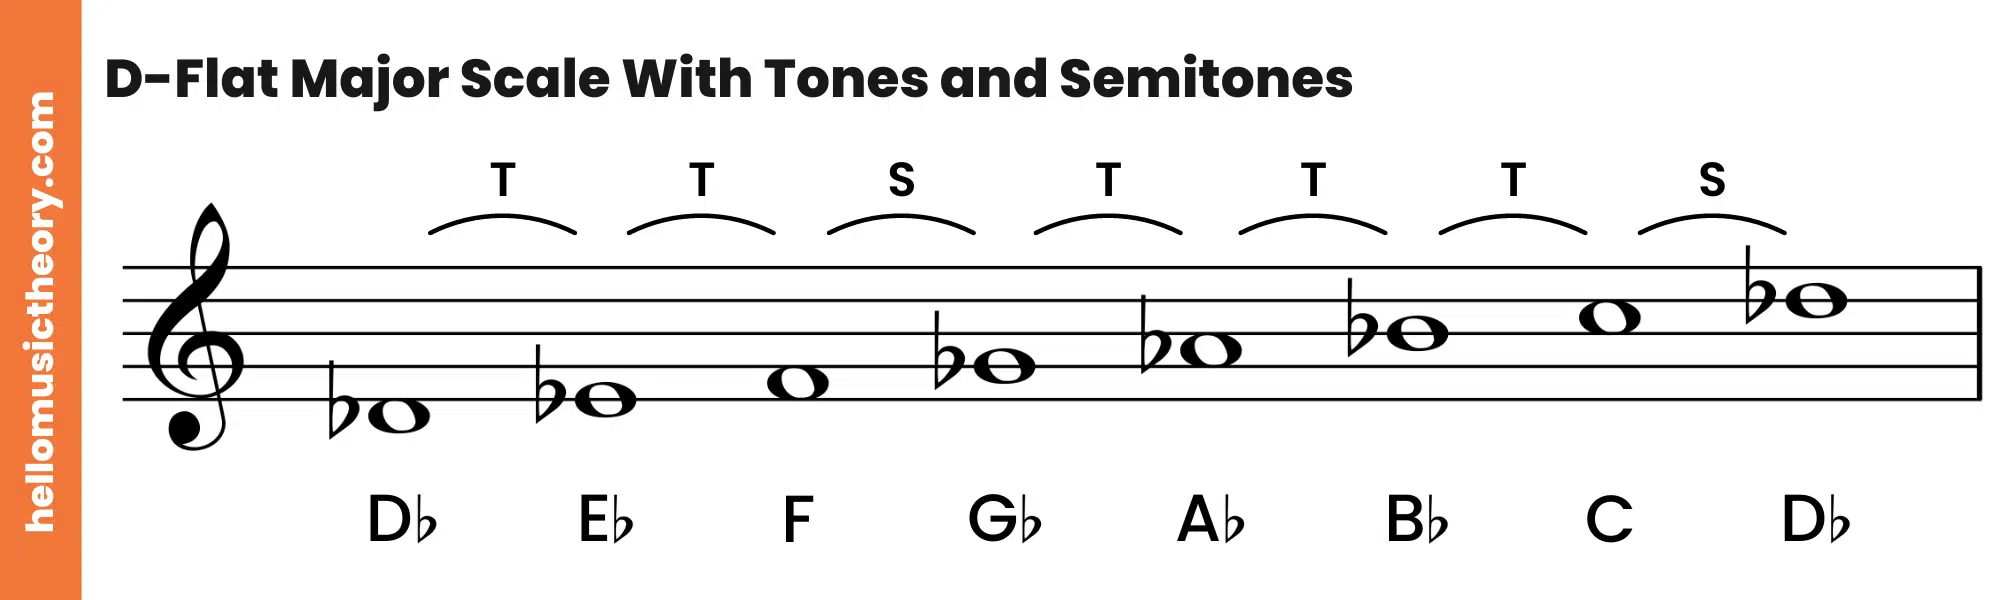 D-Flat Major Scale Treble Clef With Tones and Semitones